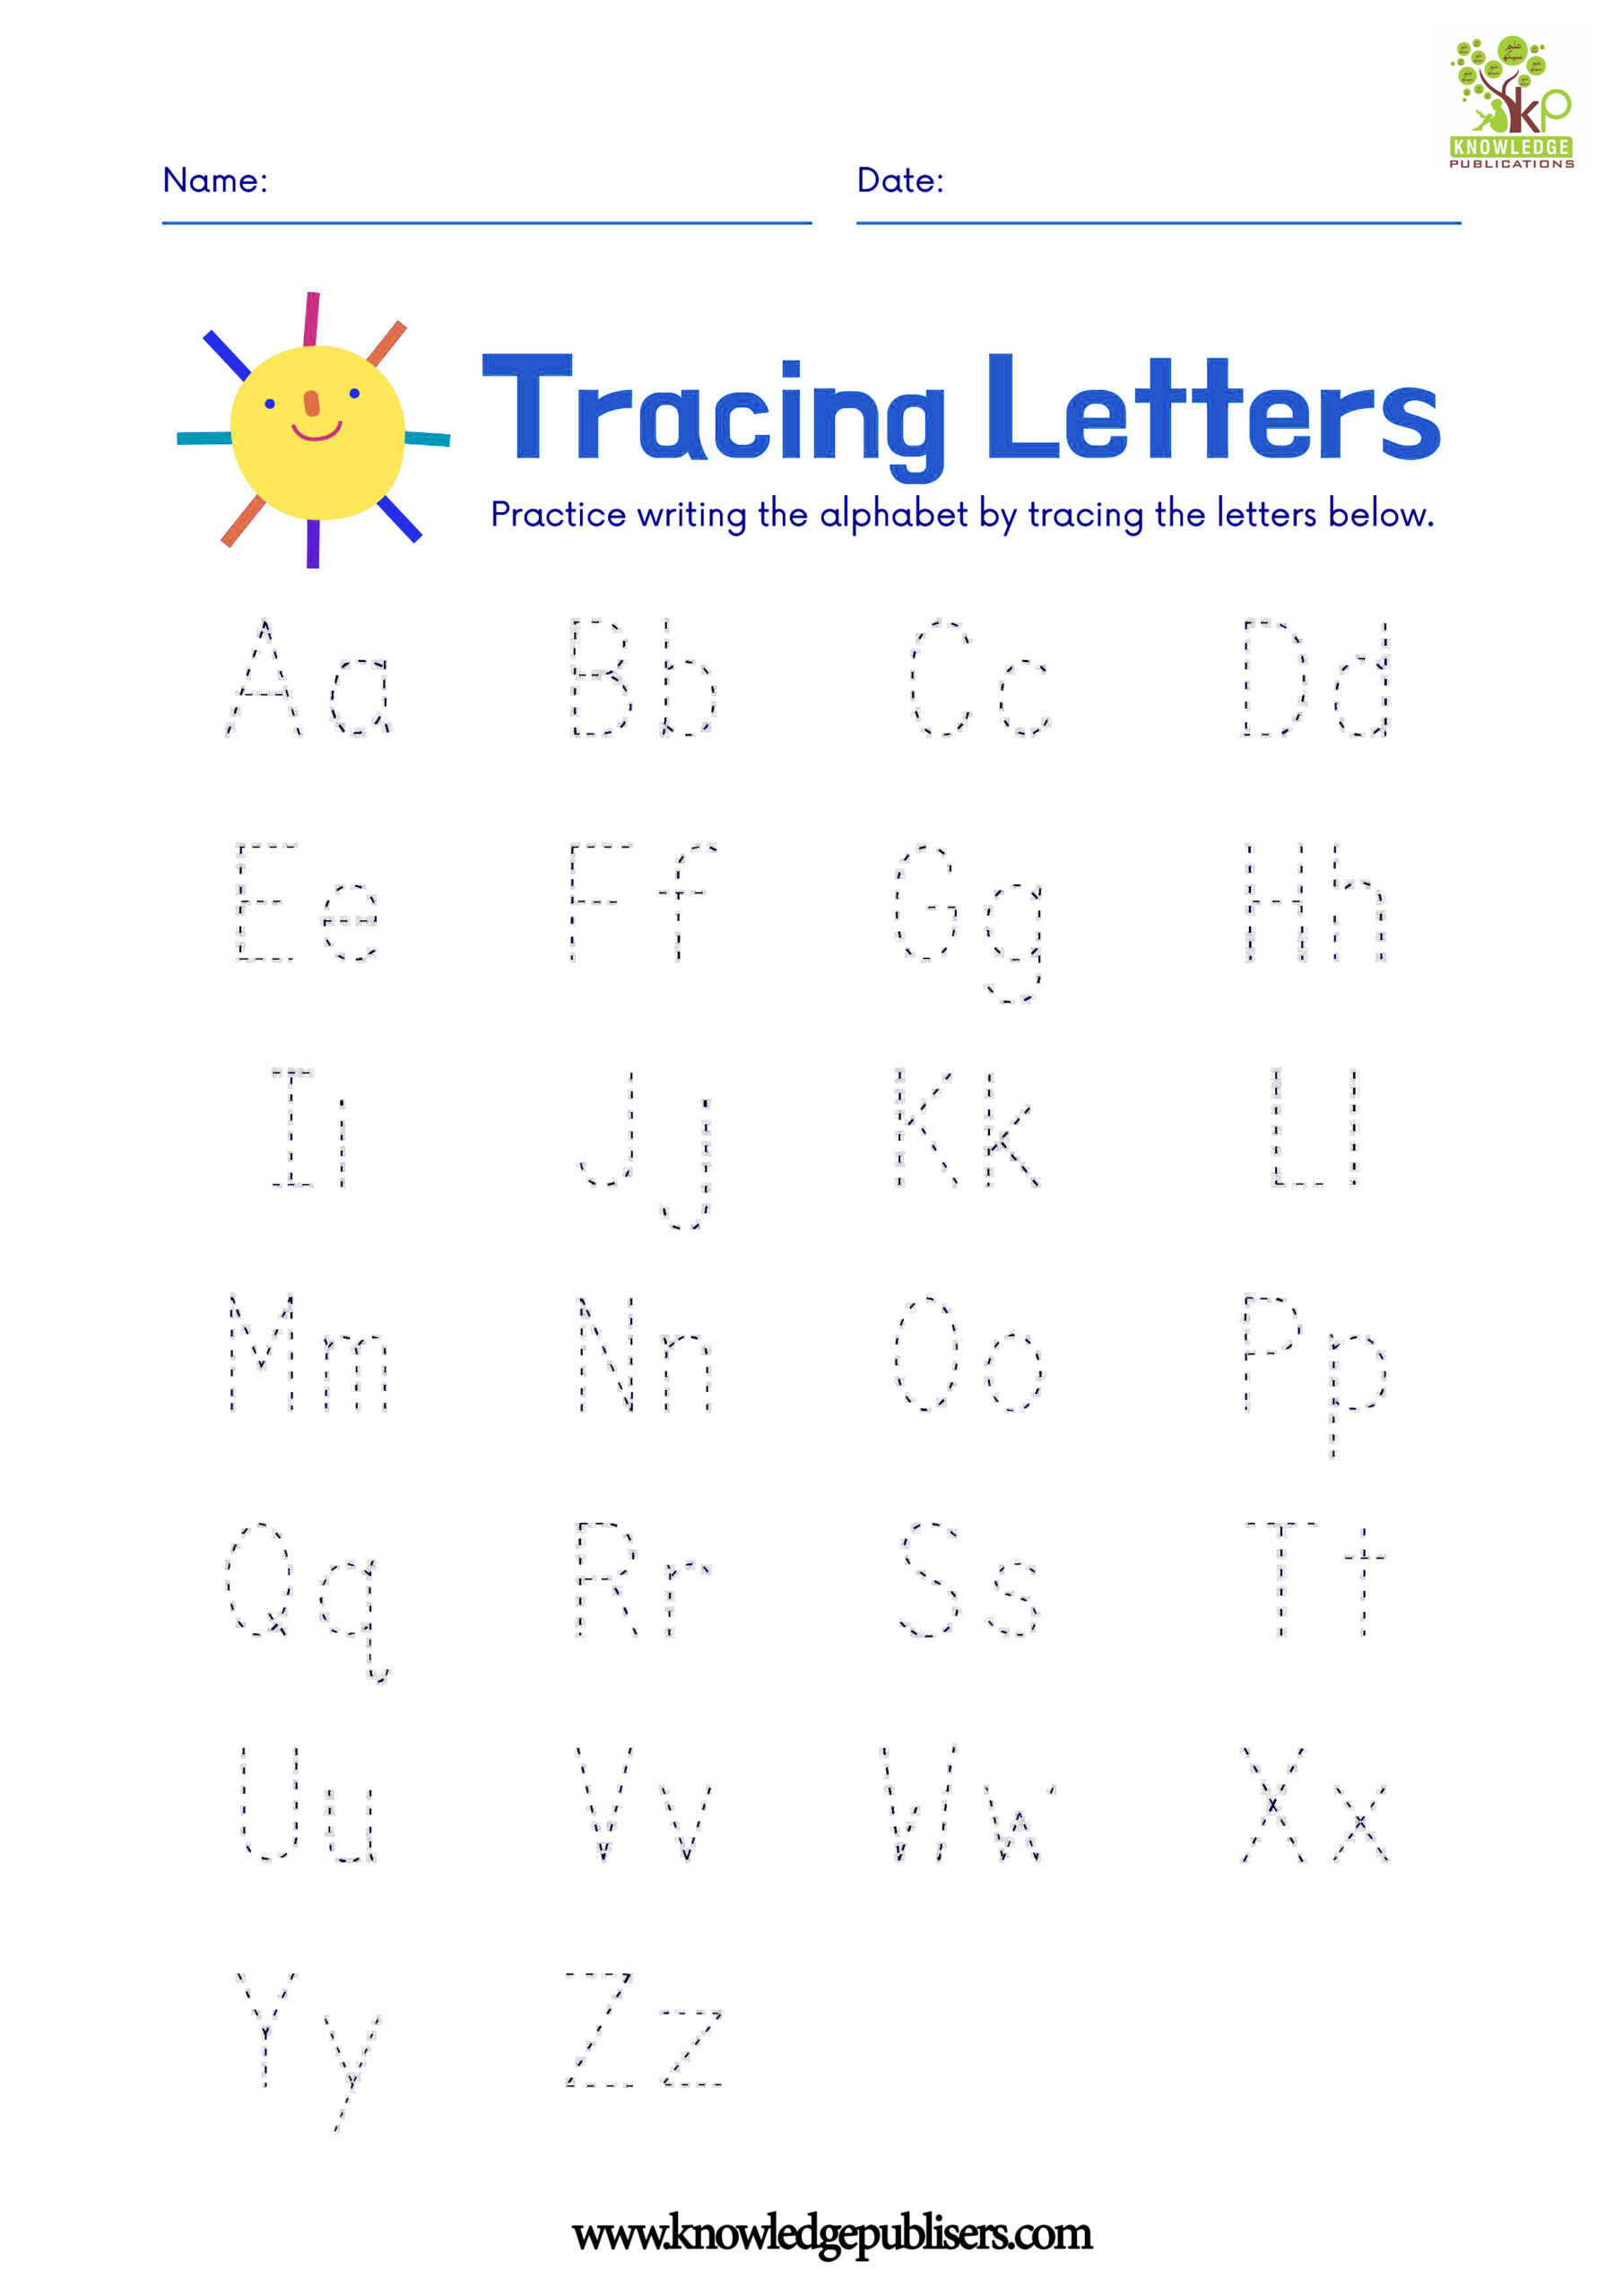 Tracing Letter Knowledge Publishers